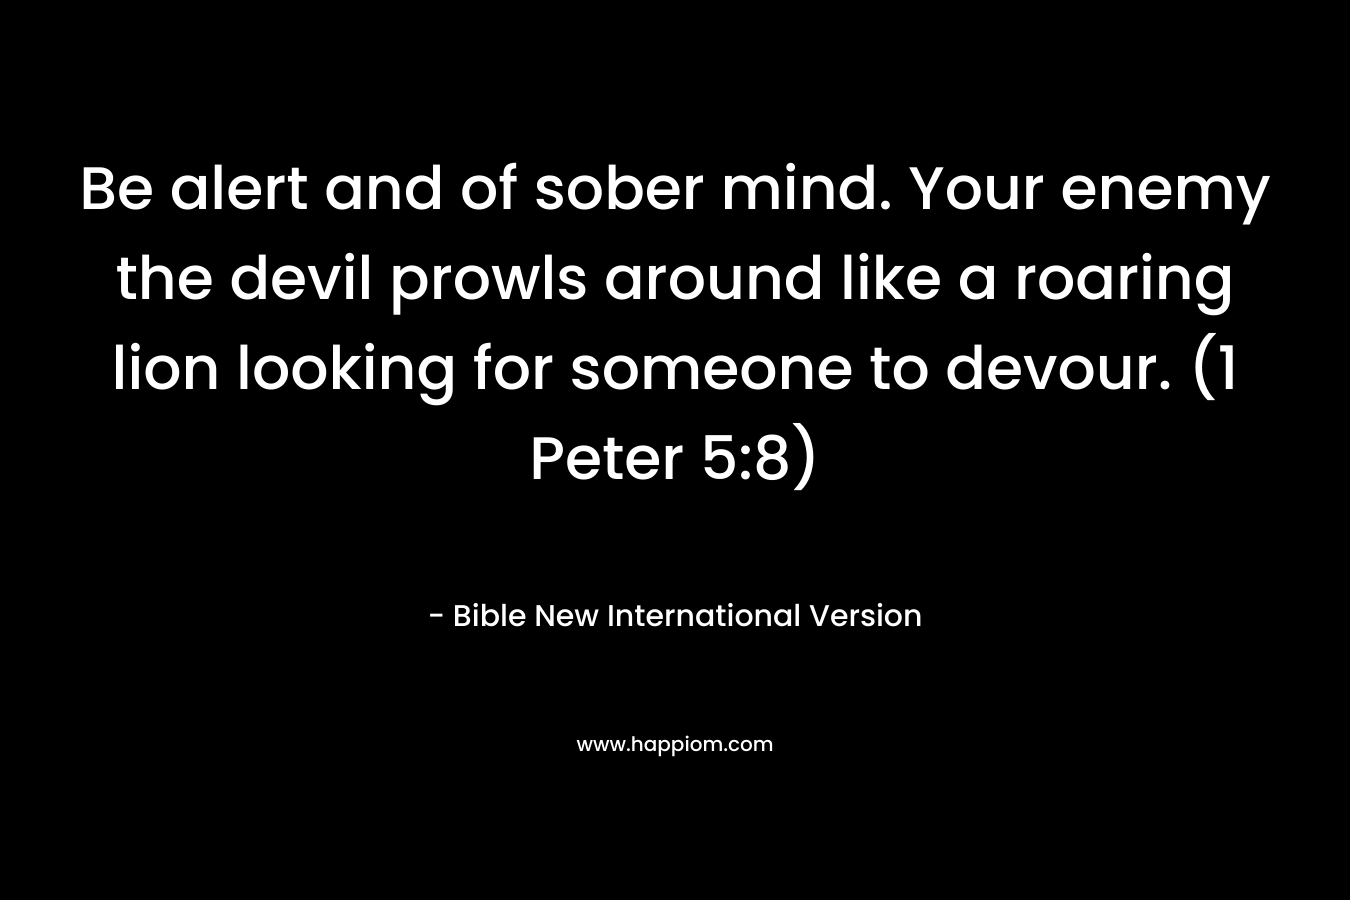 Be alert and of sober mind. Your enemy the devil prowls around like a roaring lion looking for someone to devour. (1 Peter 5:8) – Bible New International Version